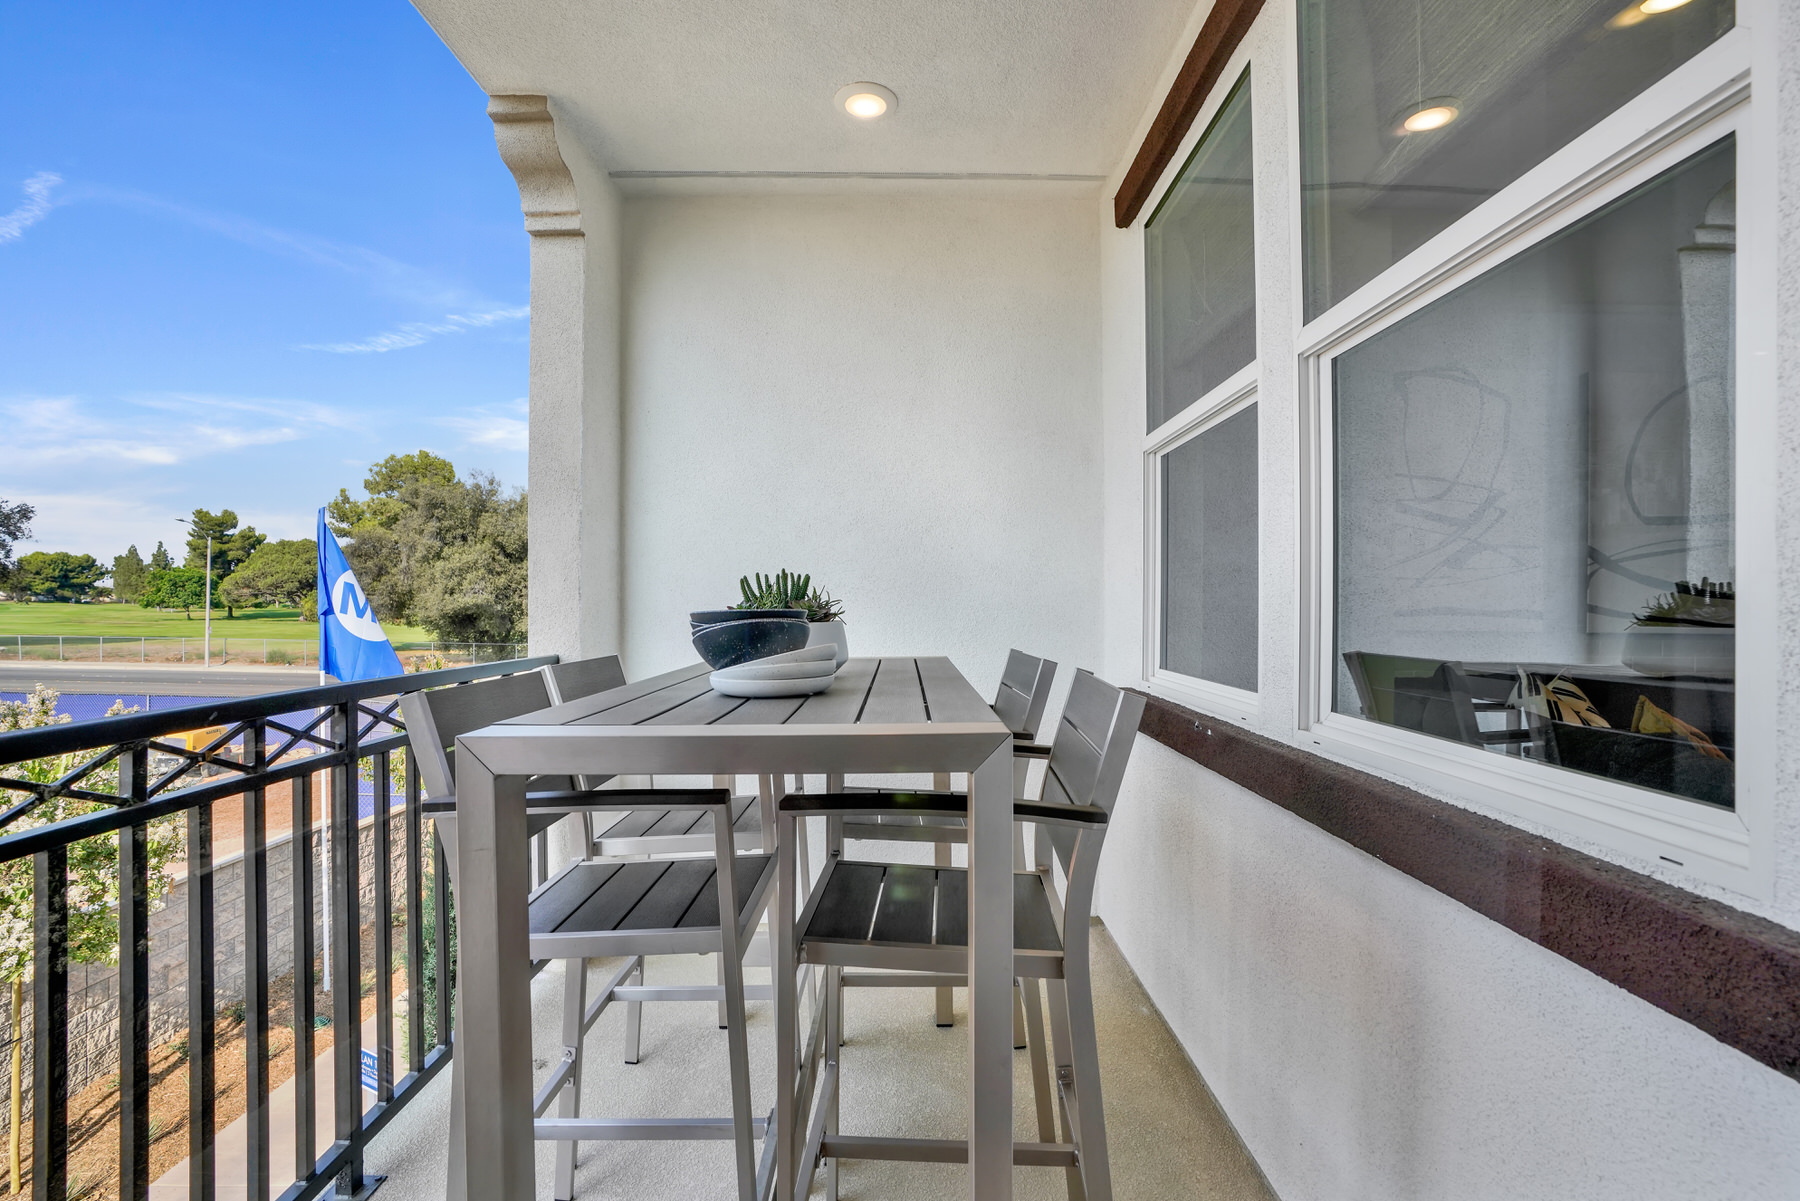 Balcony in Plan 3A at Townes at Magnolia by Melia Homes in Anaheim, CA